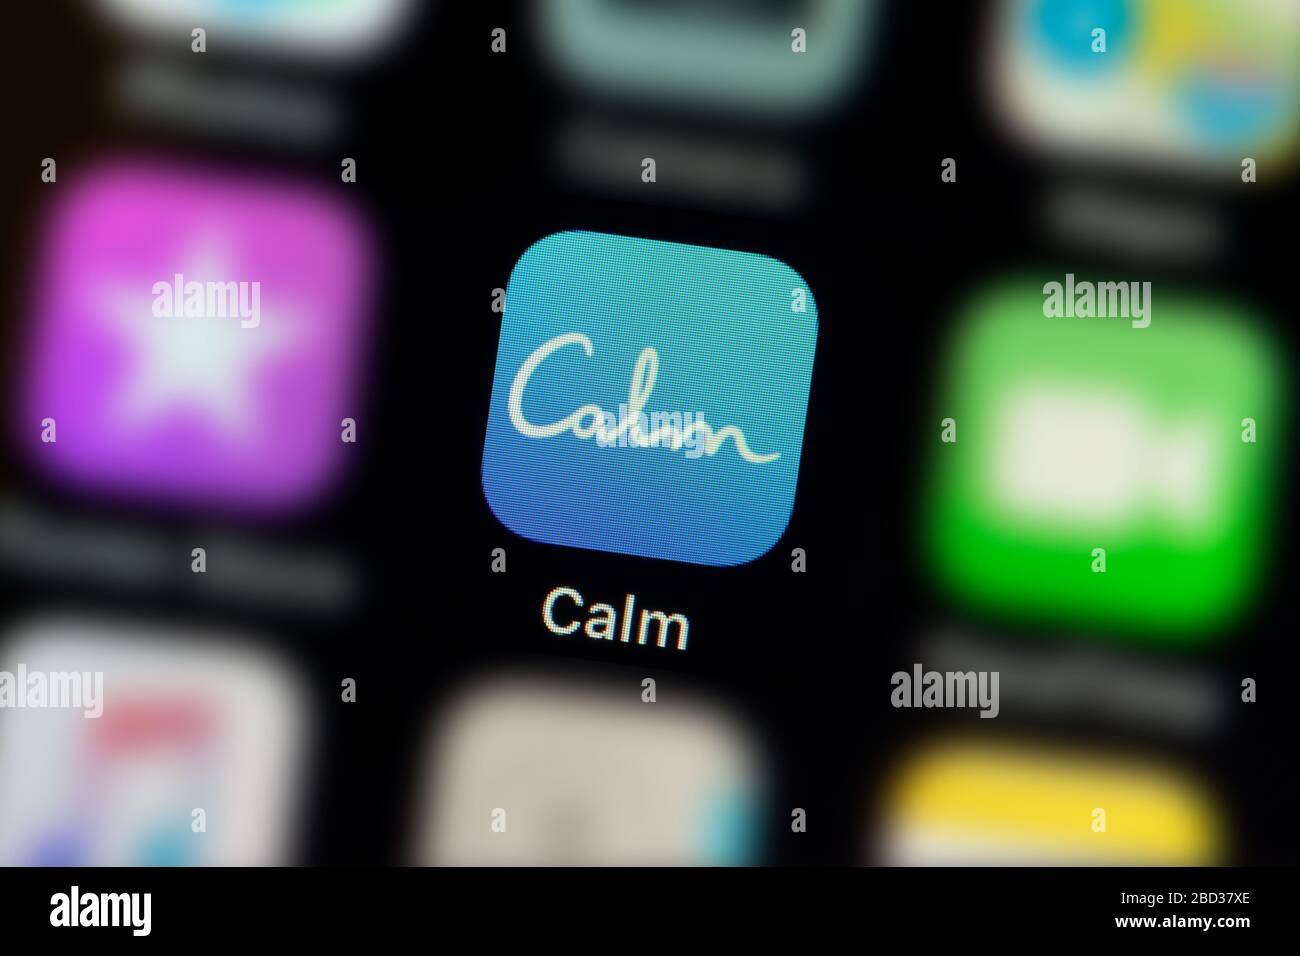 A close-up shot of the Calm app icon, as seen on the screen of a smart phone (Editorial use only) Stock Photo